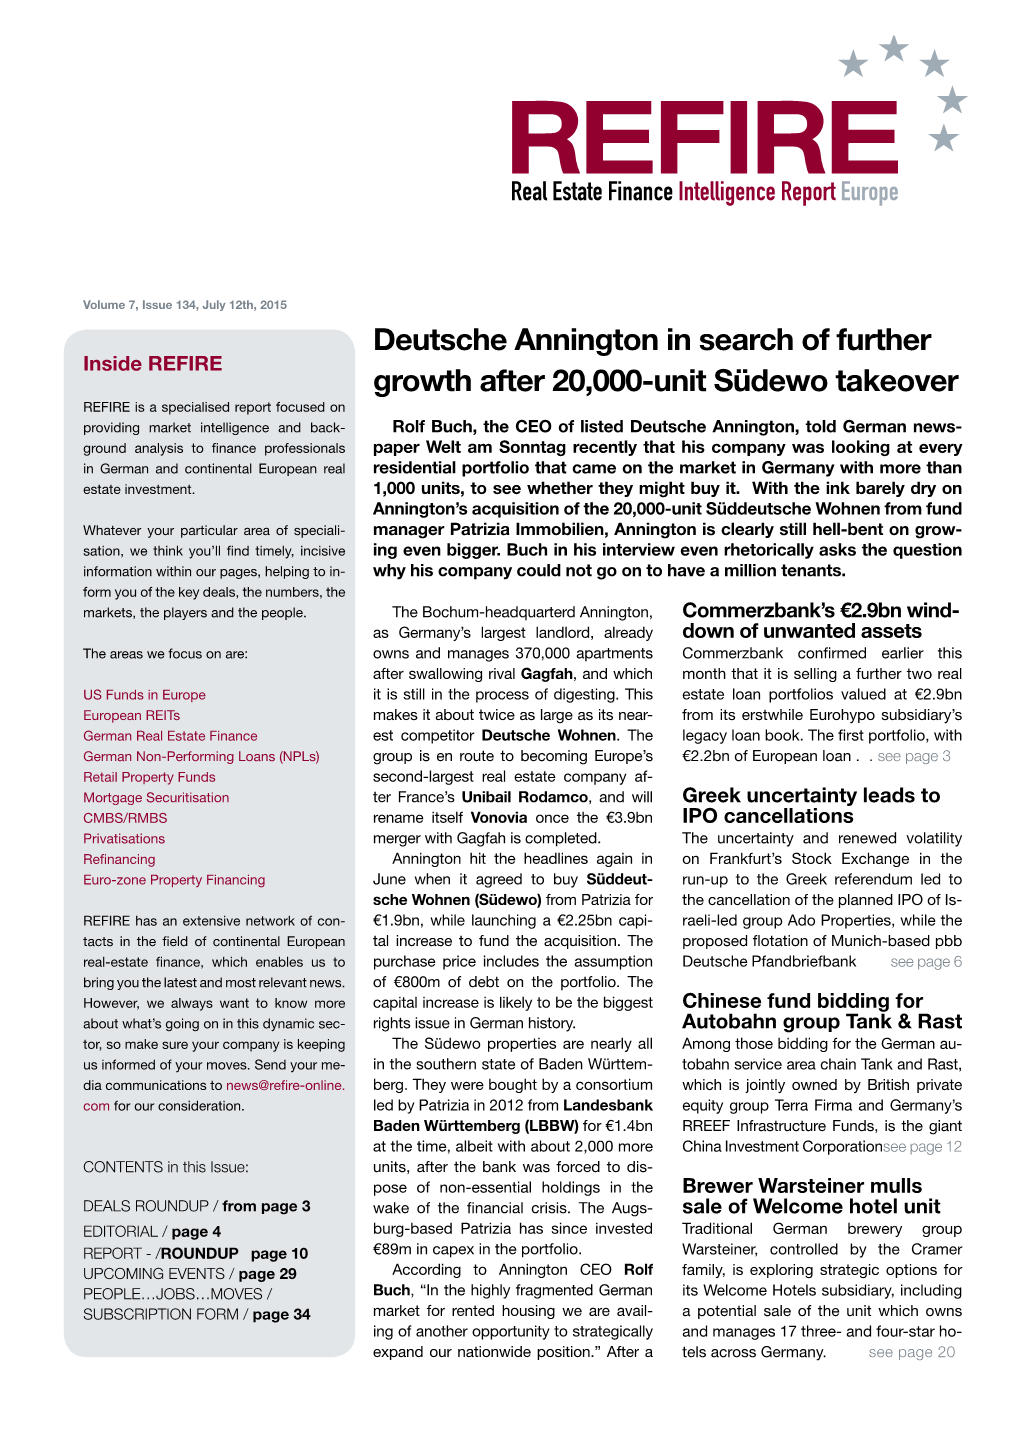 Deutsche Annington in Search of Further Growth After 20,000-Unit